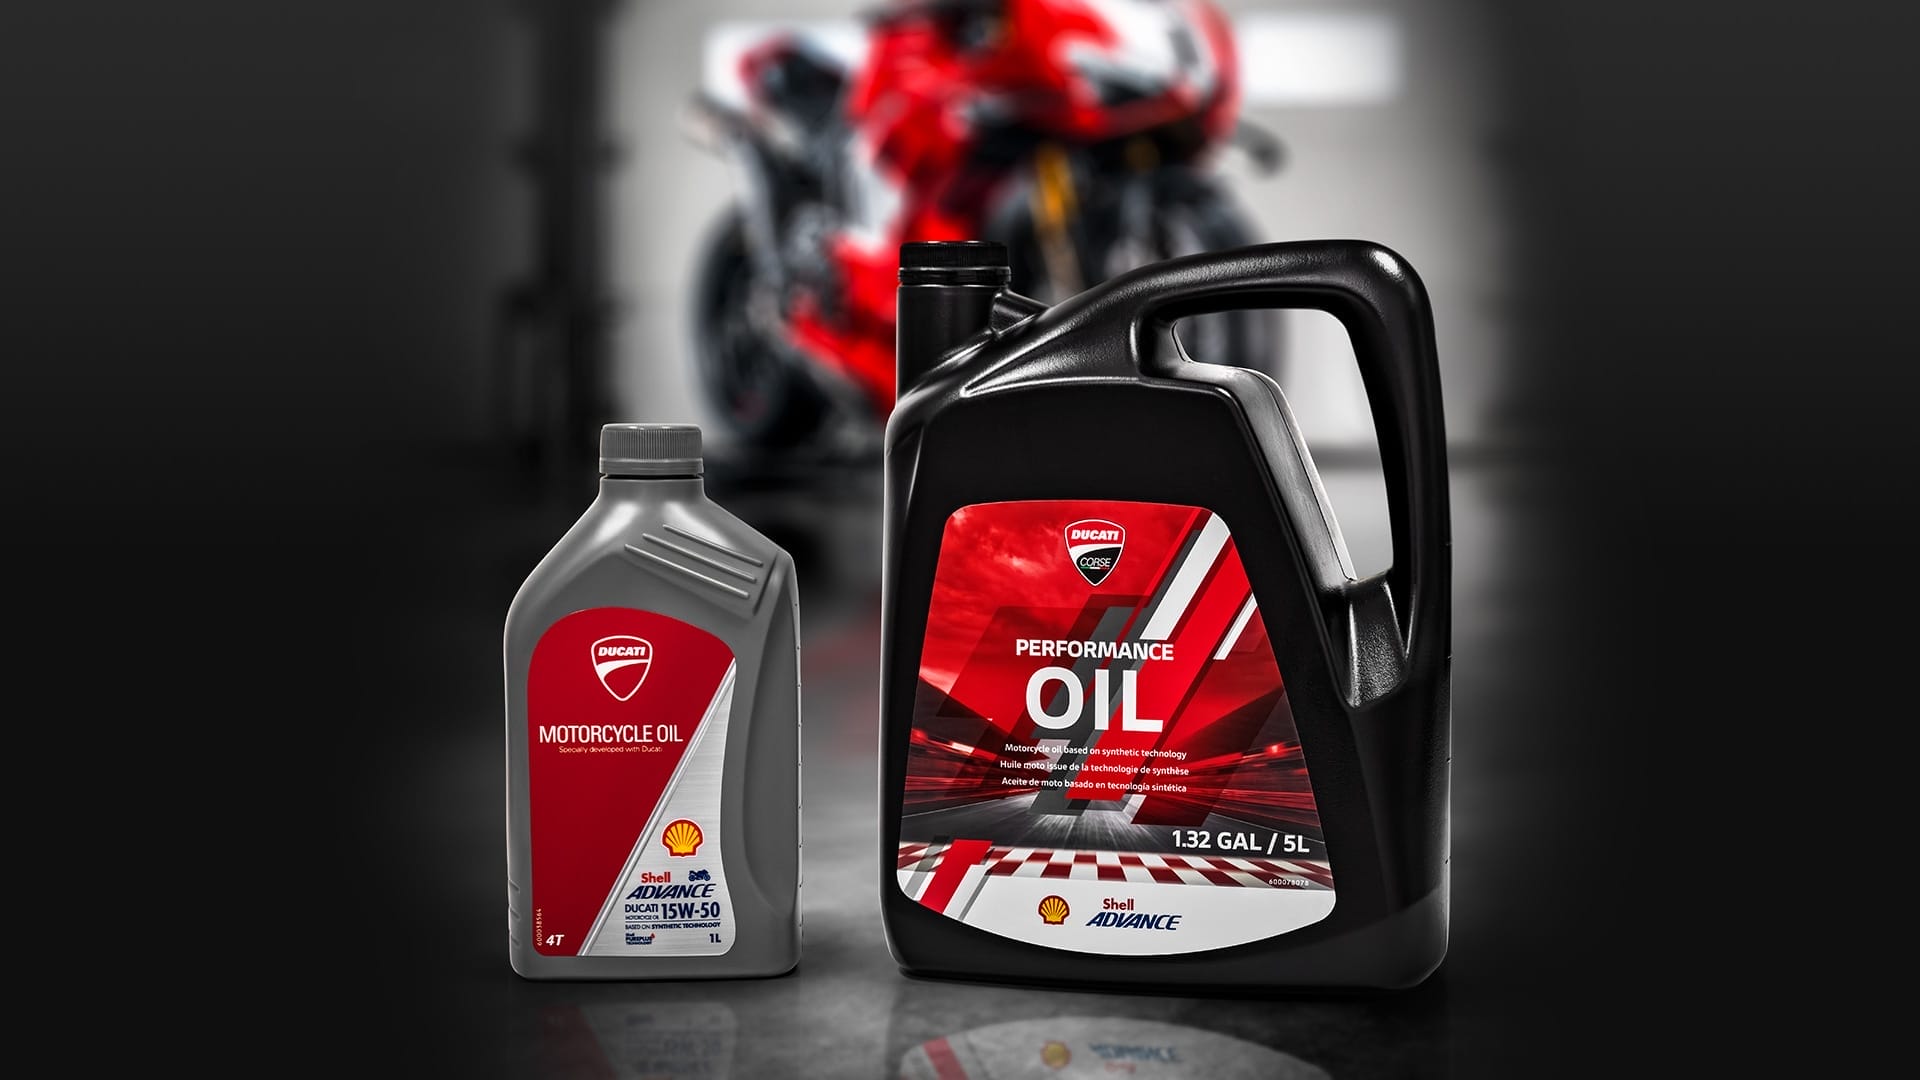 Ducati continues partnership with Shell: a look into the future of motorcycle performance